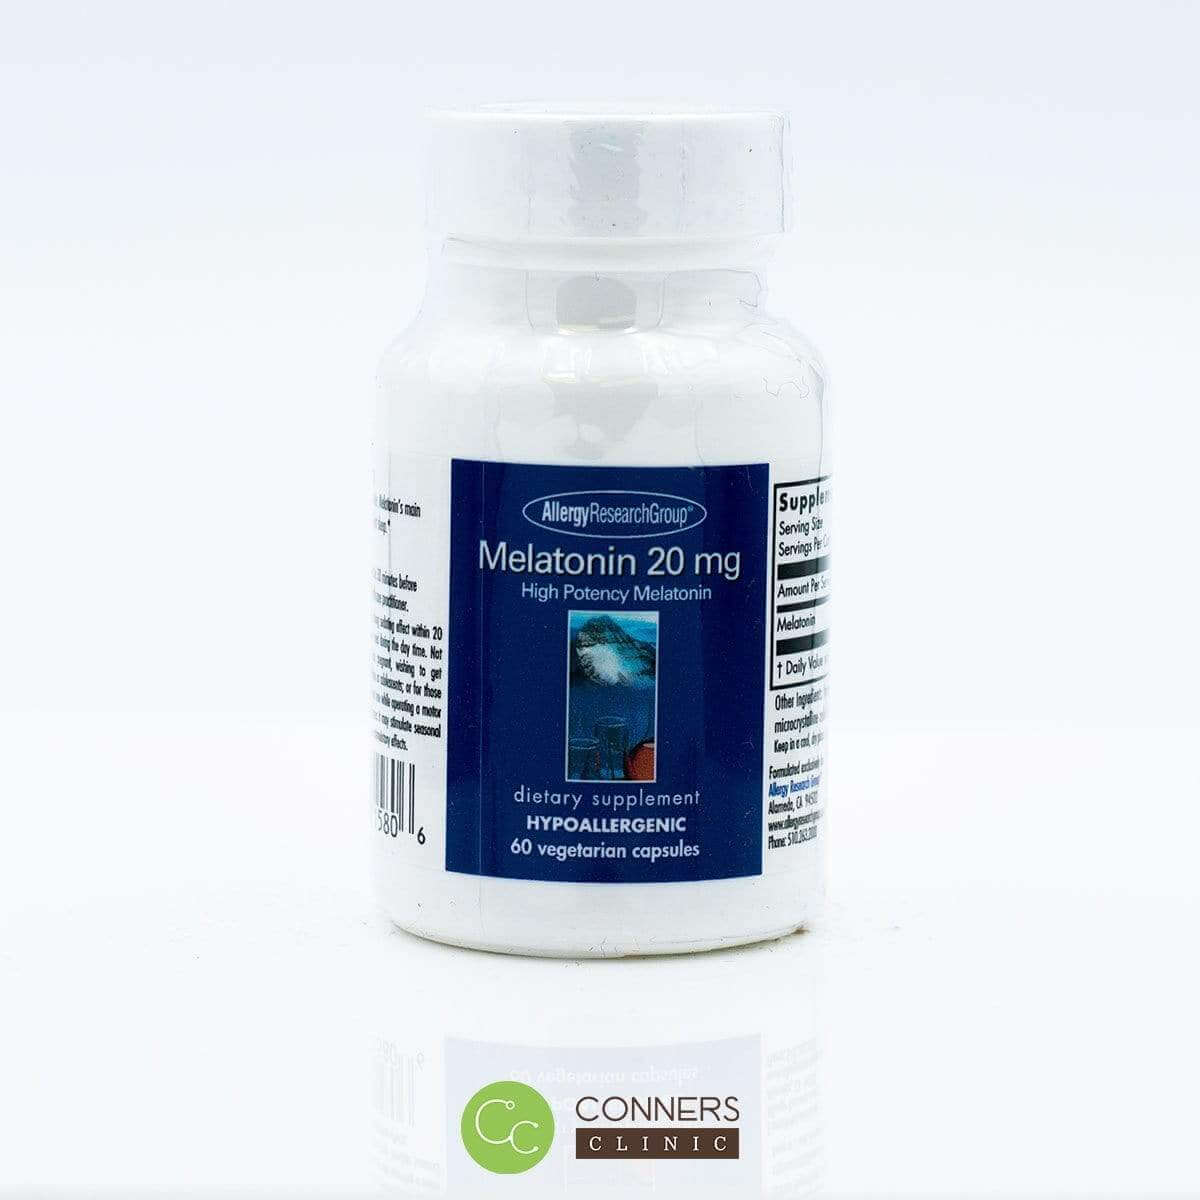 Melatonin 20mg Allergy Research Group Supplement - Conners Clinic